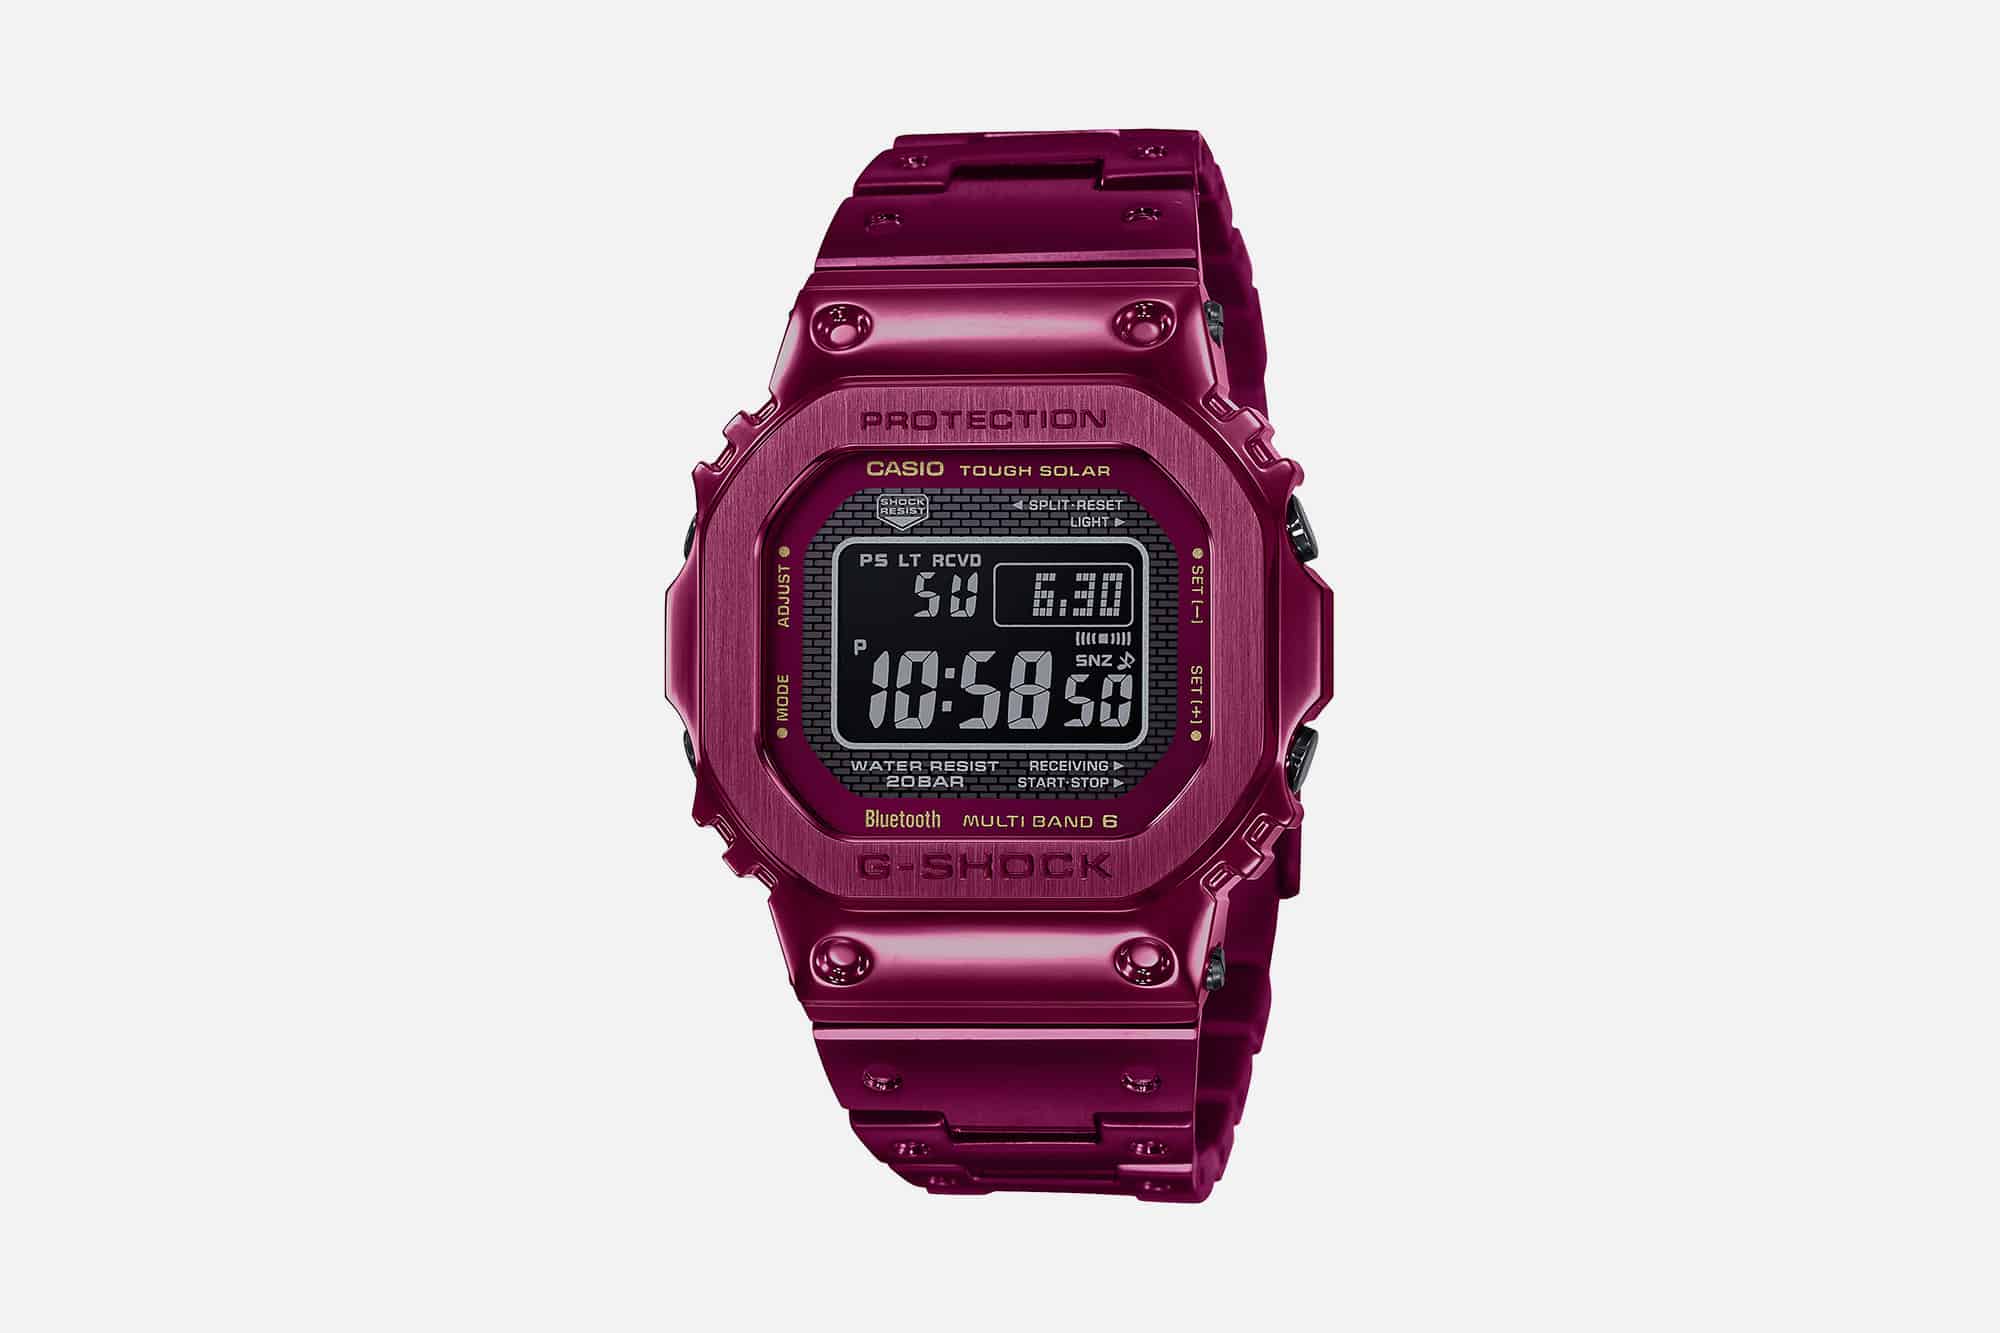 Introducing the G-Shock GMWB5000RD-4, Their Latest in Full Metal and Bright Red